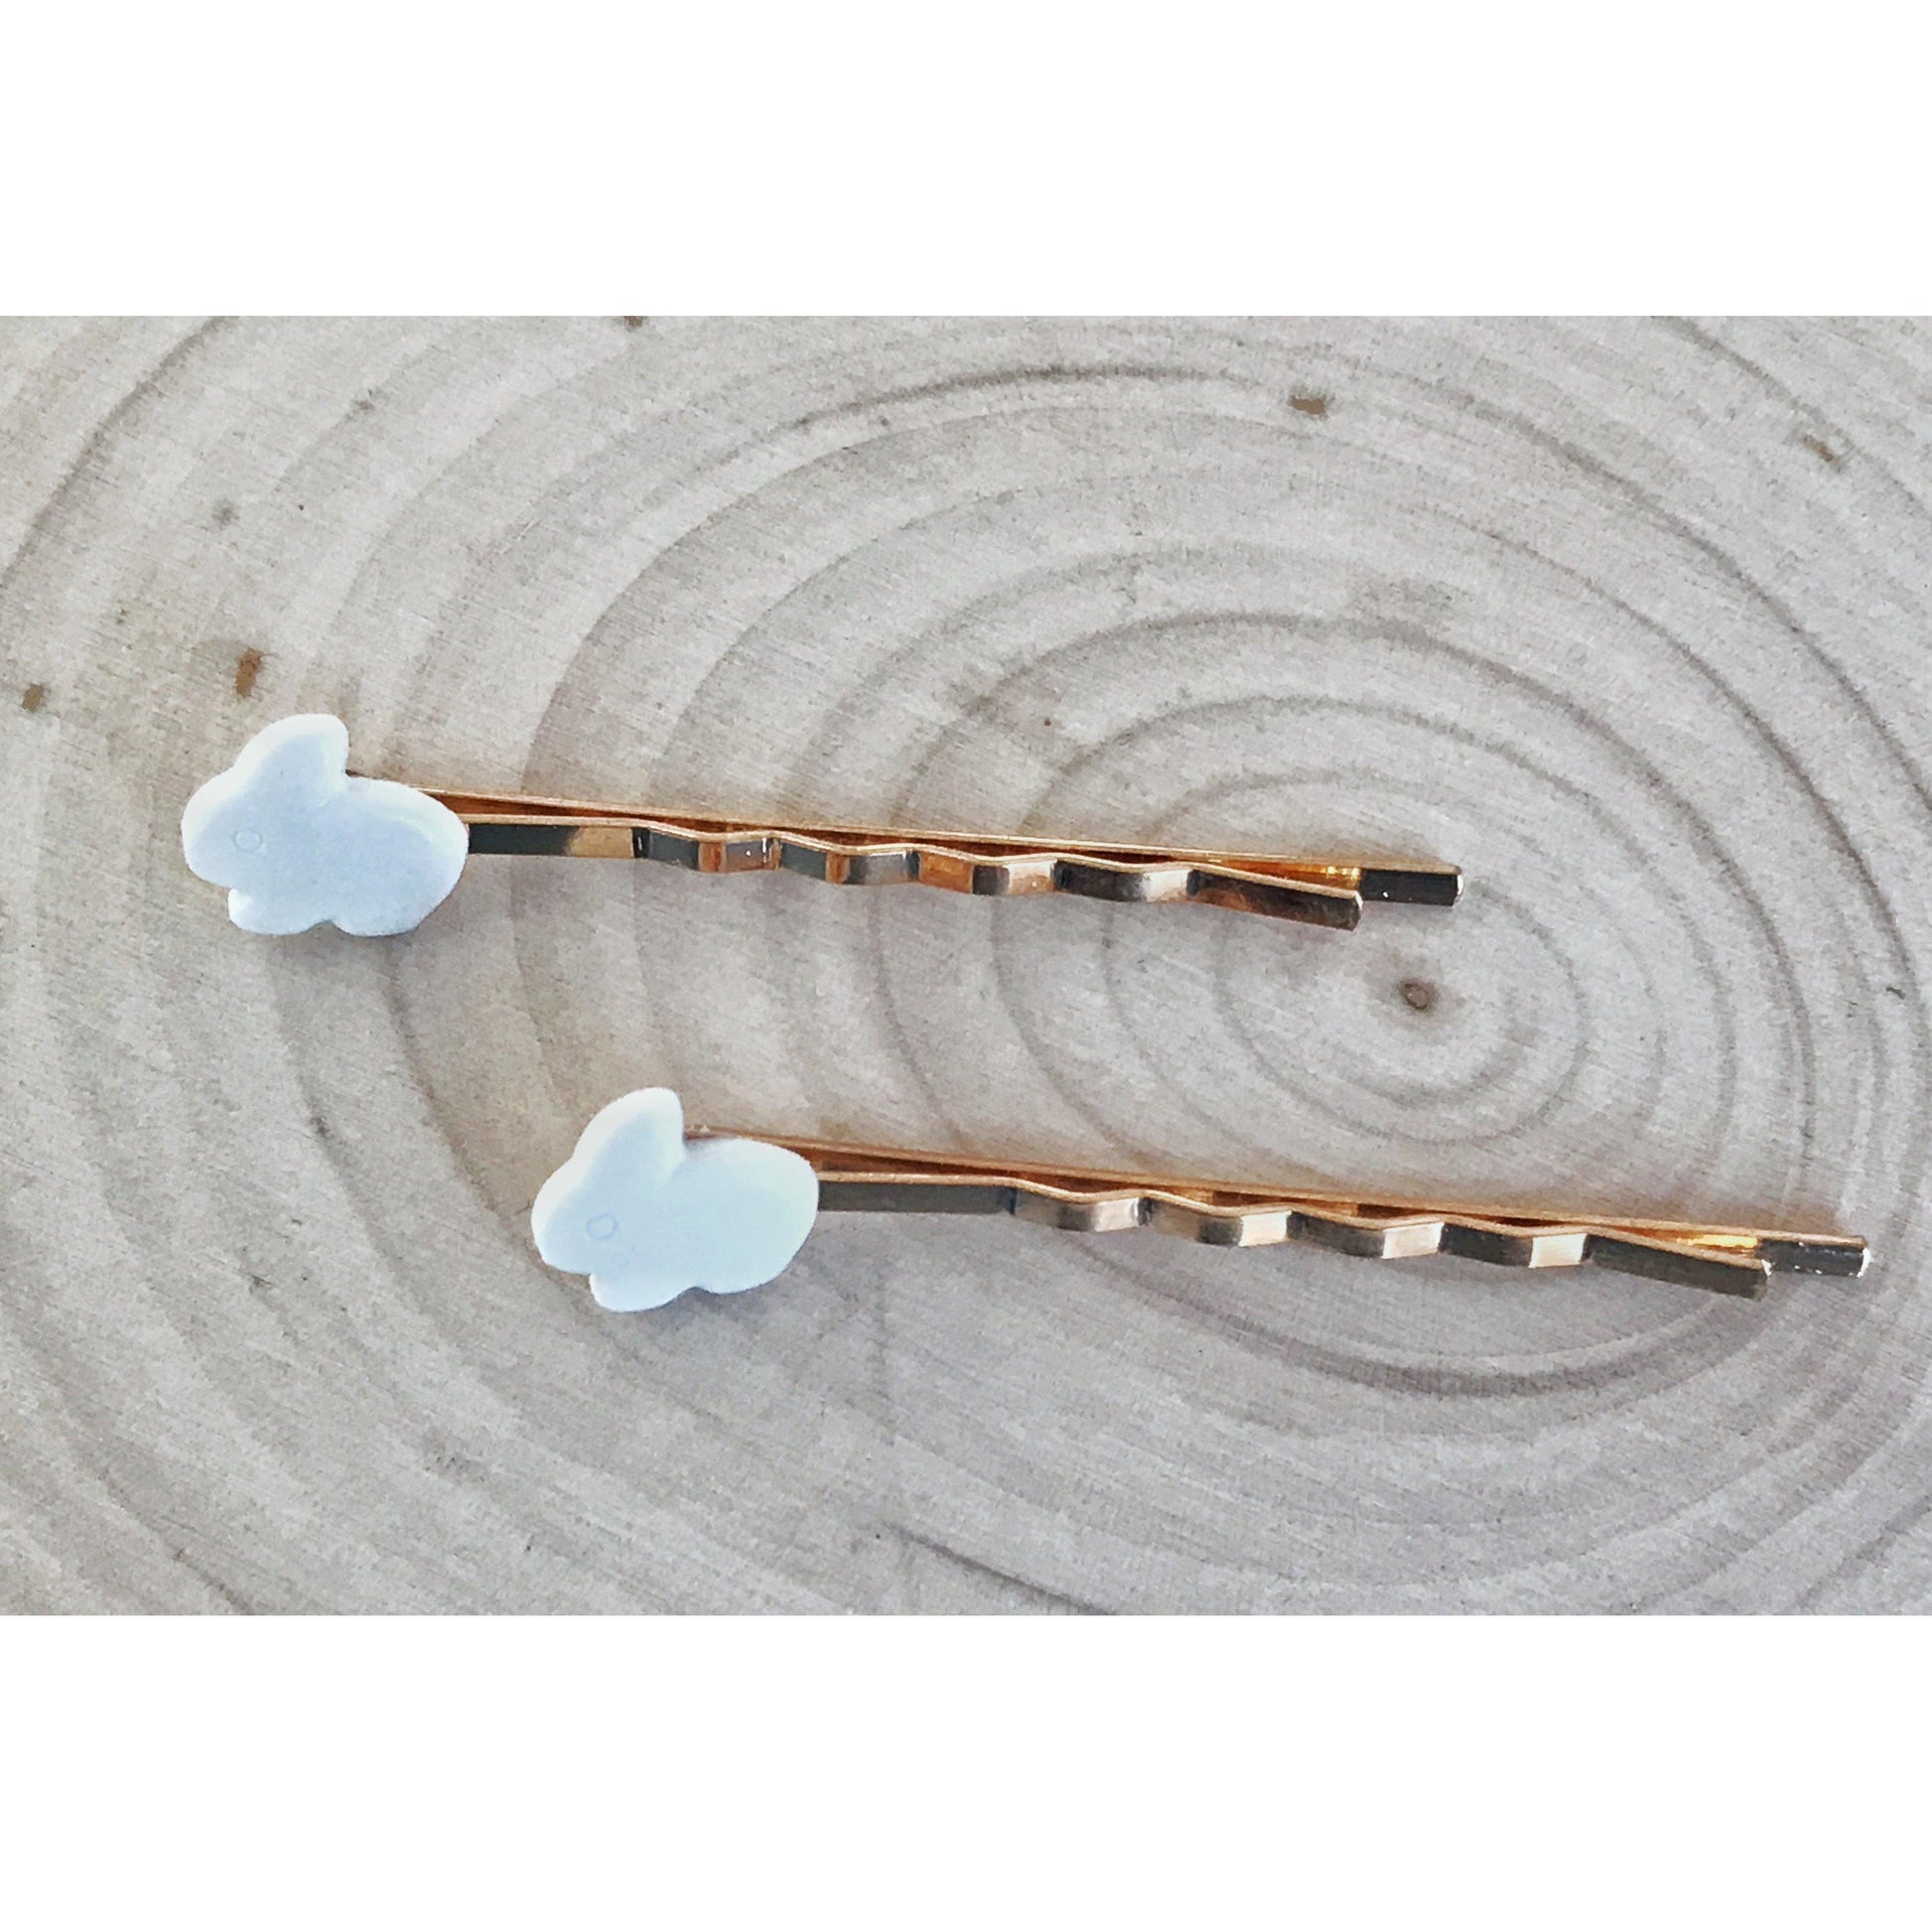 Bunny Rabbit Hair Pins - Easter Hair Accessories | Bunny Bobby Pins for Women's Hairstyles, Decorative Hair Clips